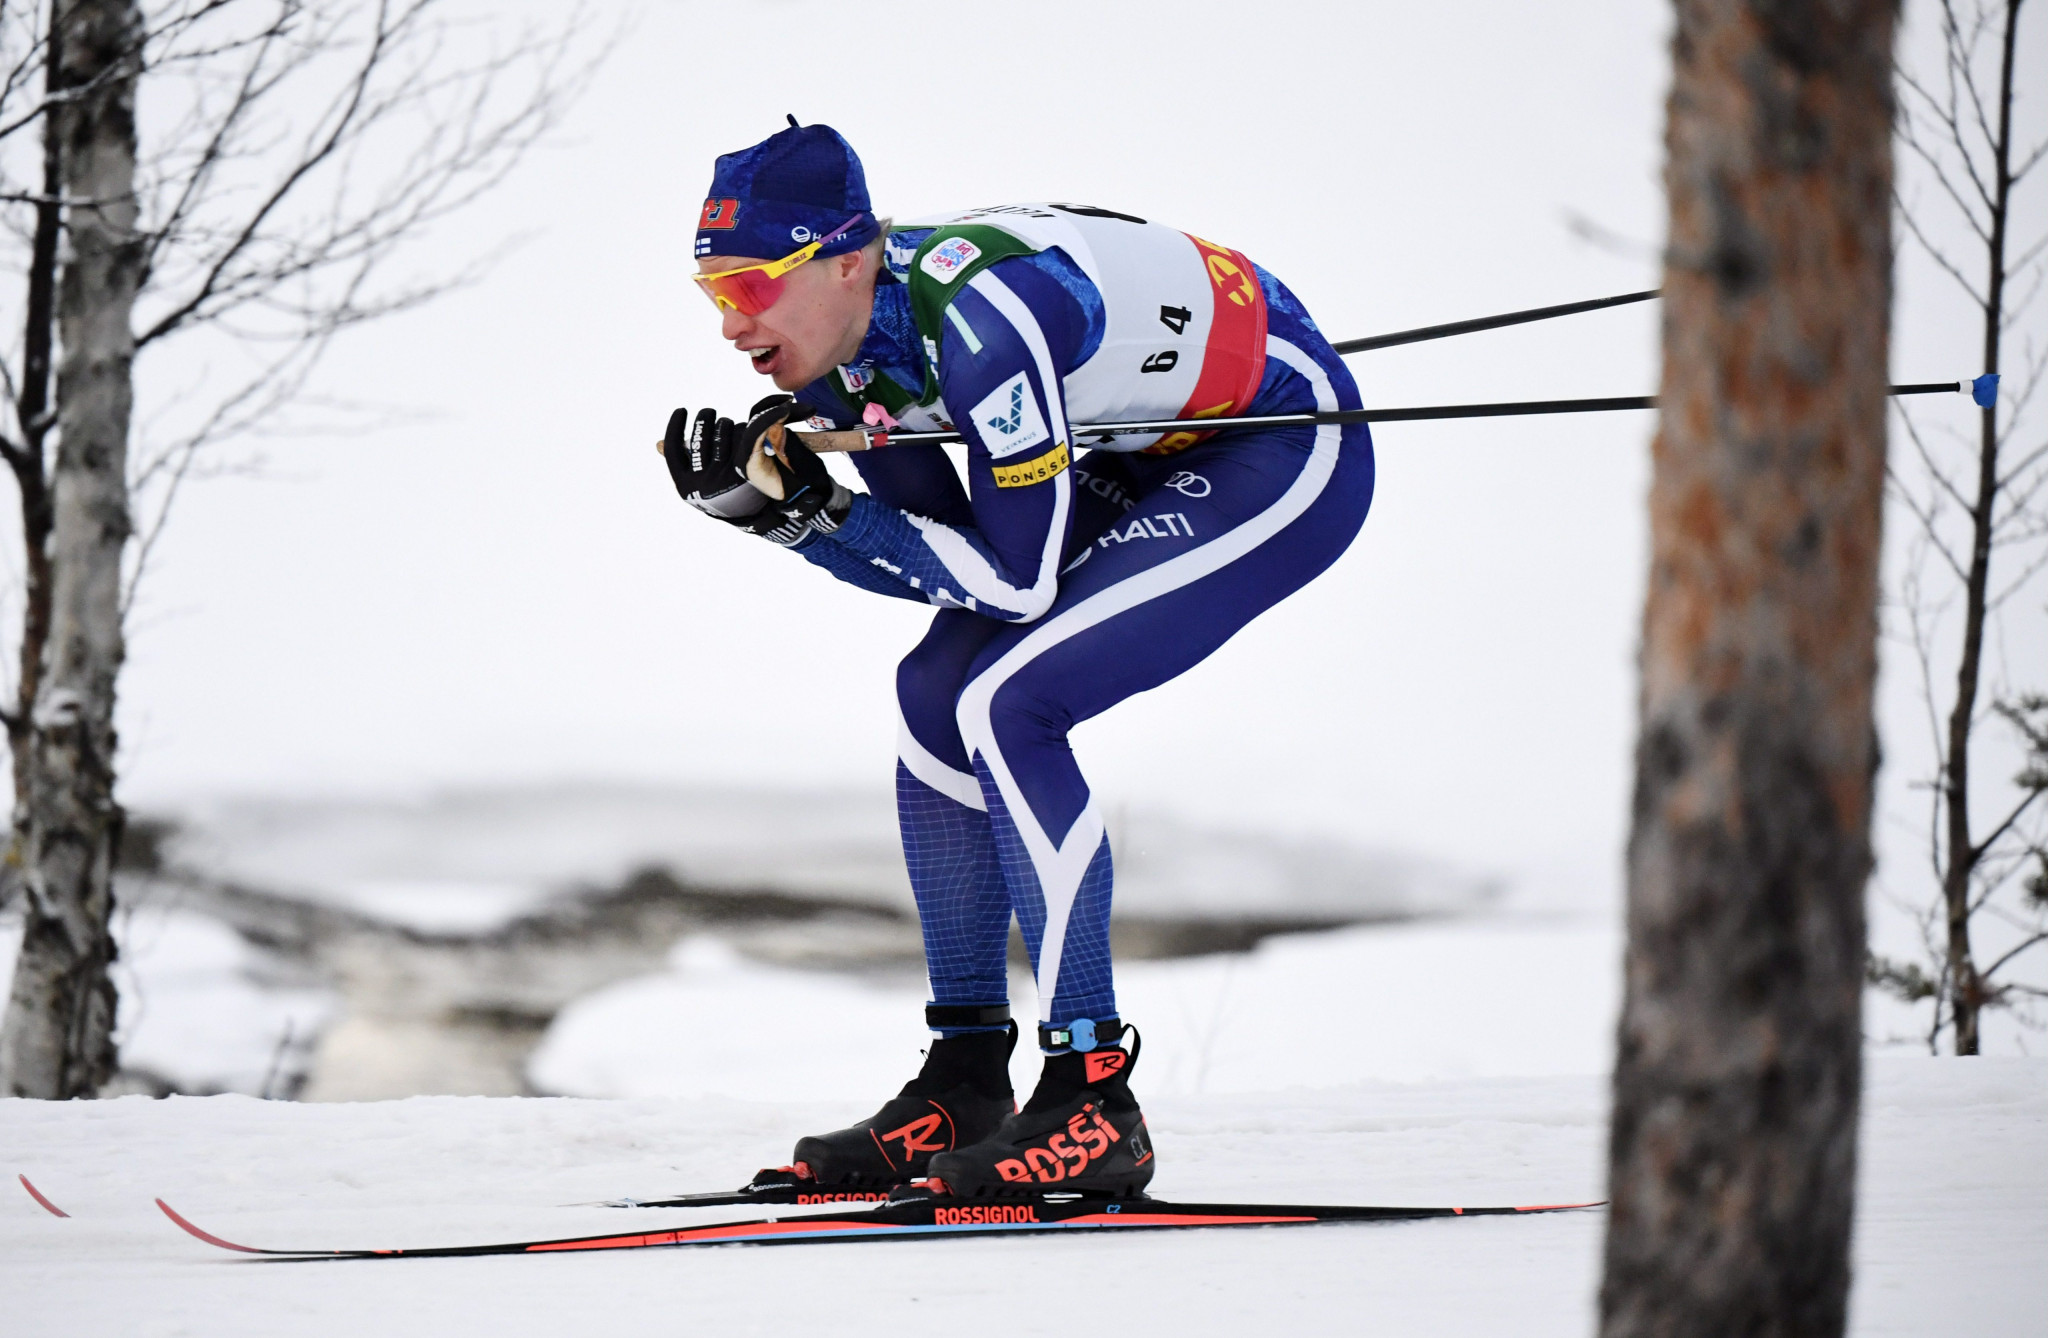 Finland's Iivo Niskanen will look for his second win in a row tomorrow when the latest FIS Cross Country World Cup starts in Ulricehamn ©Getty Images